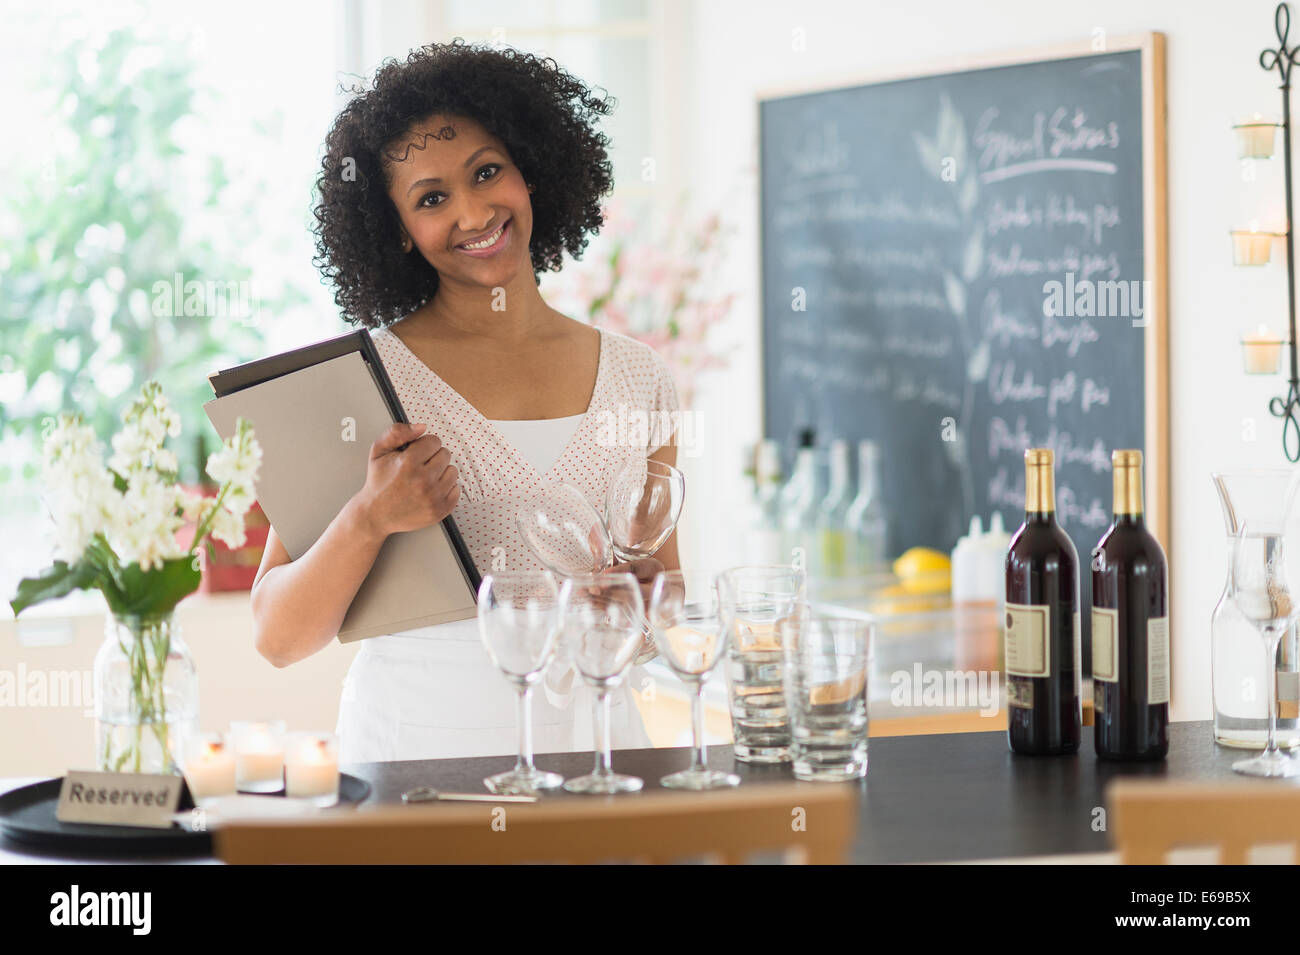 Mixed race hostess smiling in restaurant Stock Photo